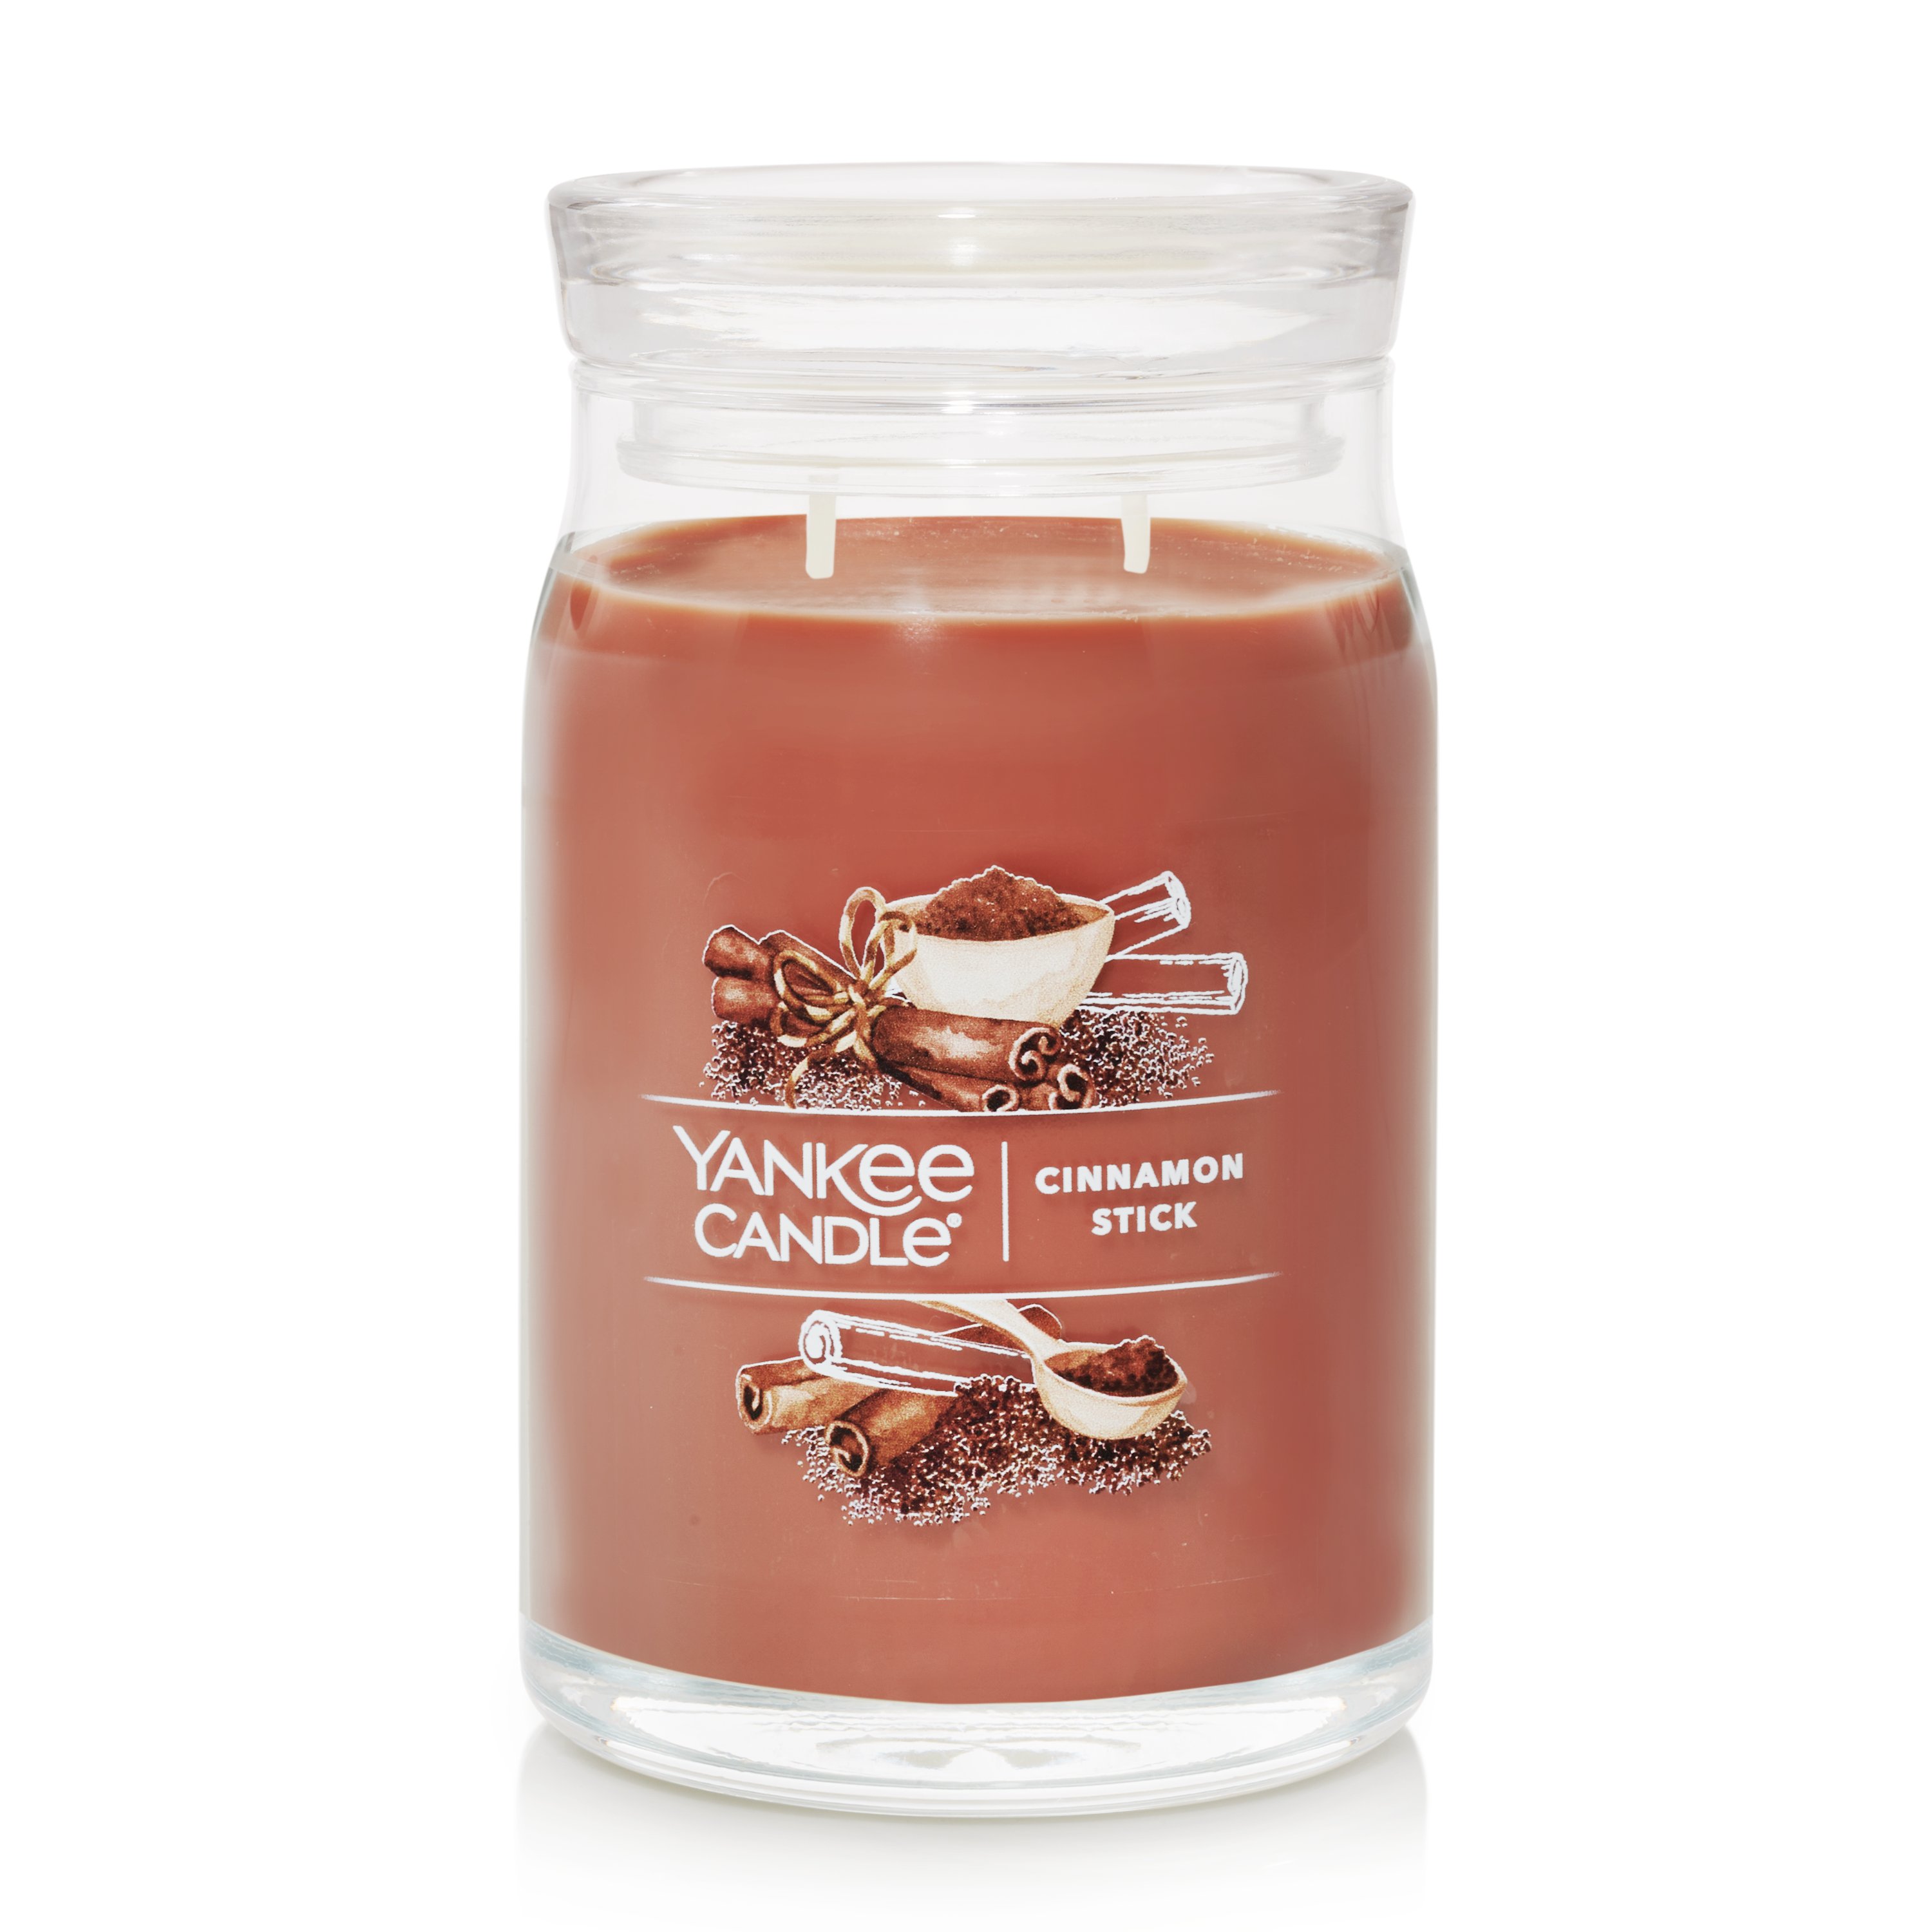 Yankee Candle Cinnamon Stick Candle Jar - Home Store + More